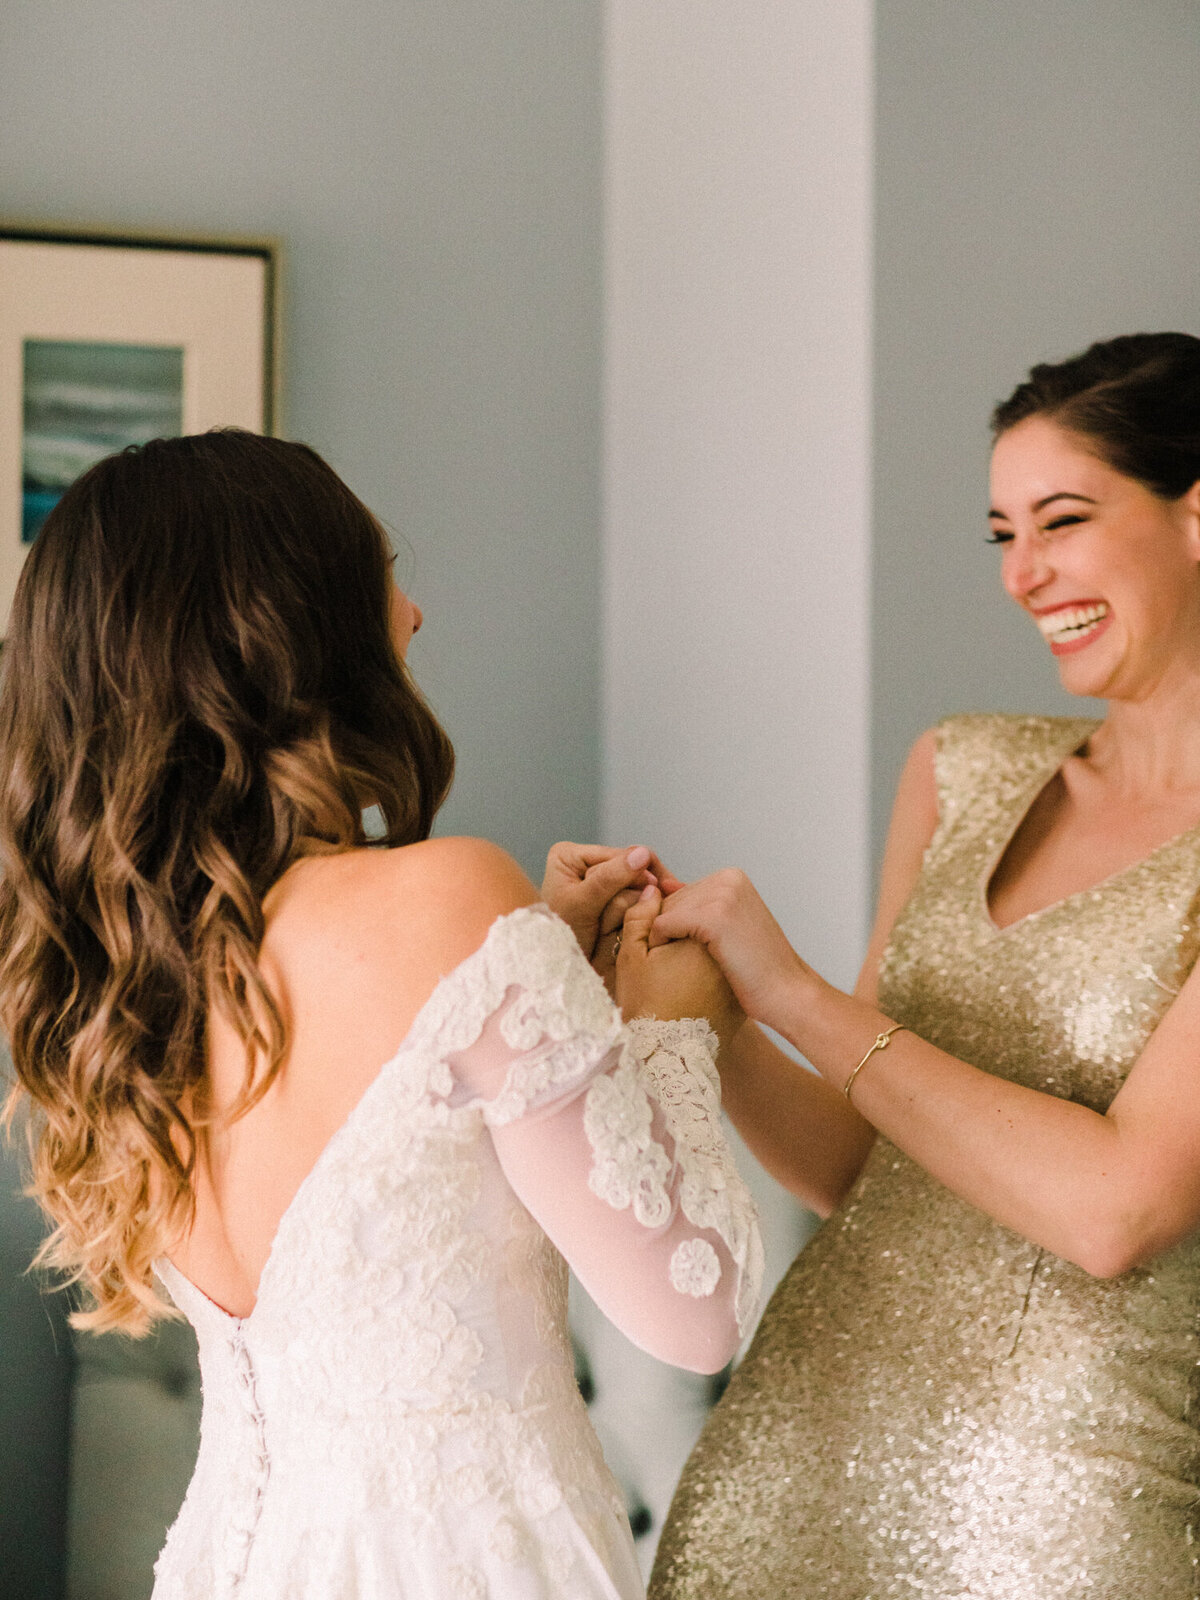 A candid moment between a bride and her best friend on the wedding day